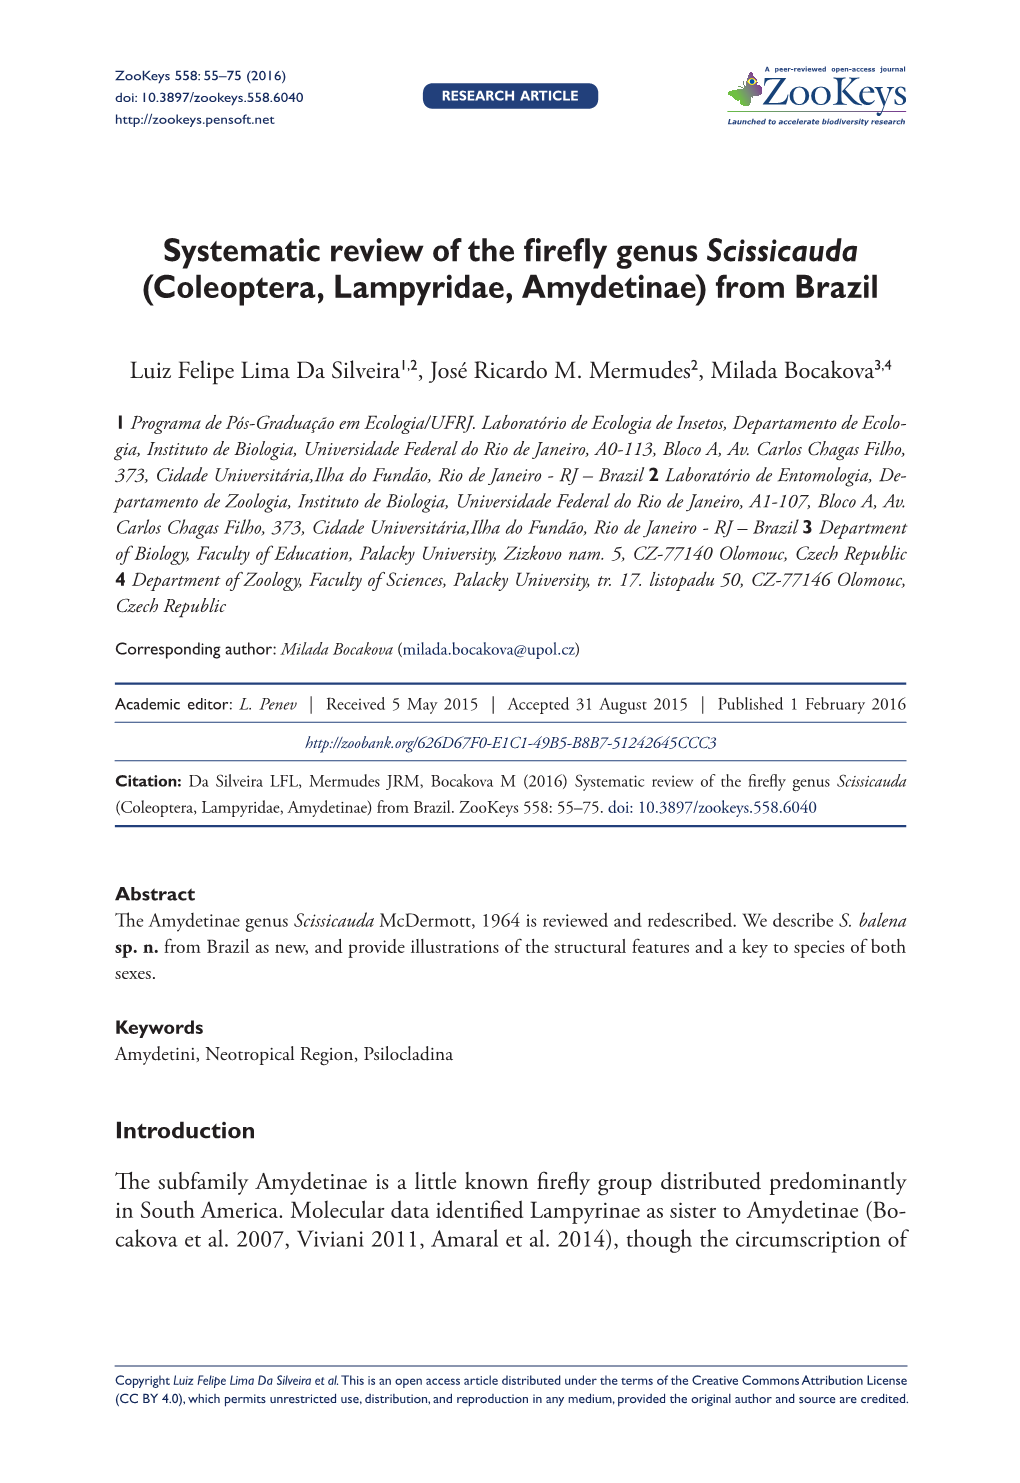 Systematic Review of the Firefly Genus Scissicauda (Coleoptera, Lampyridae, Amydetinae) from Brazil